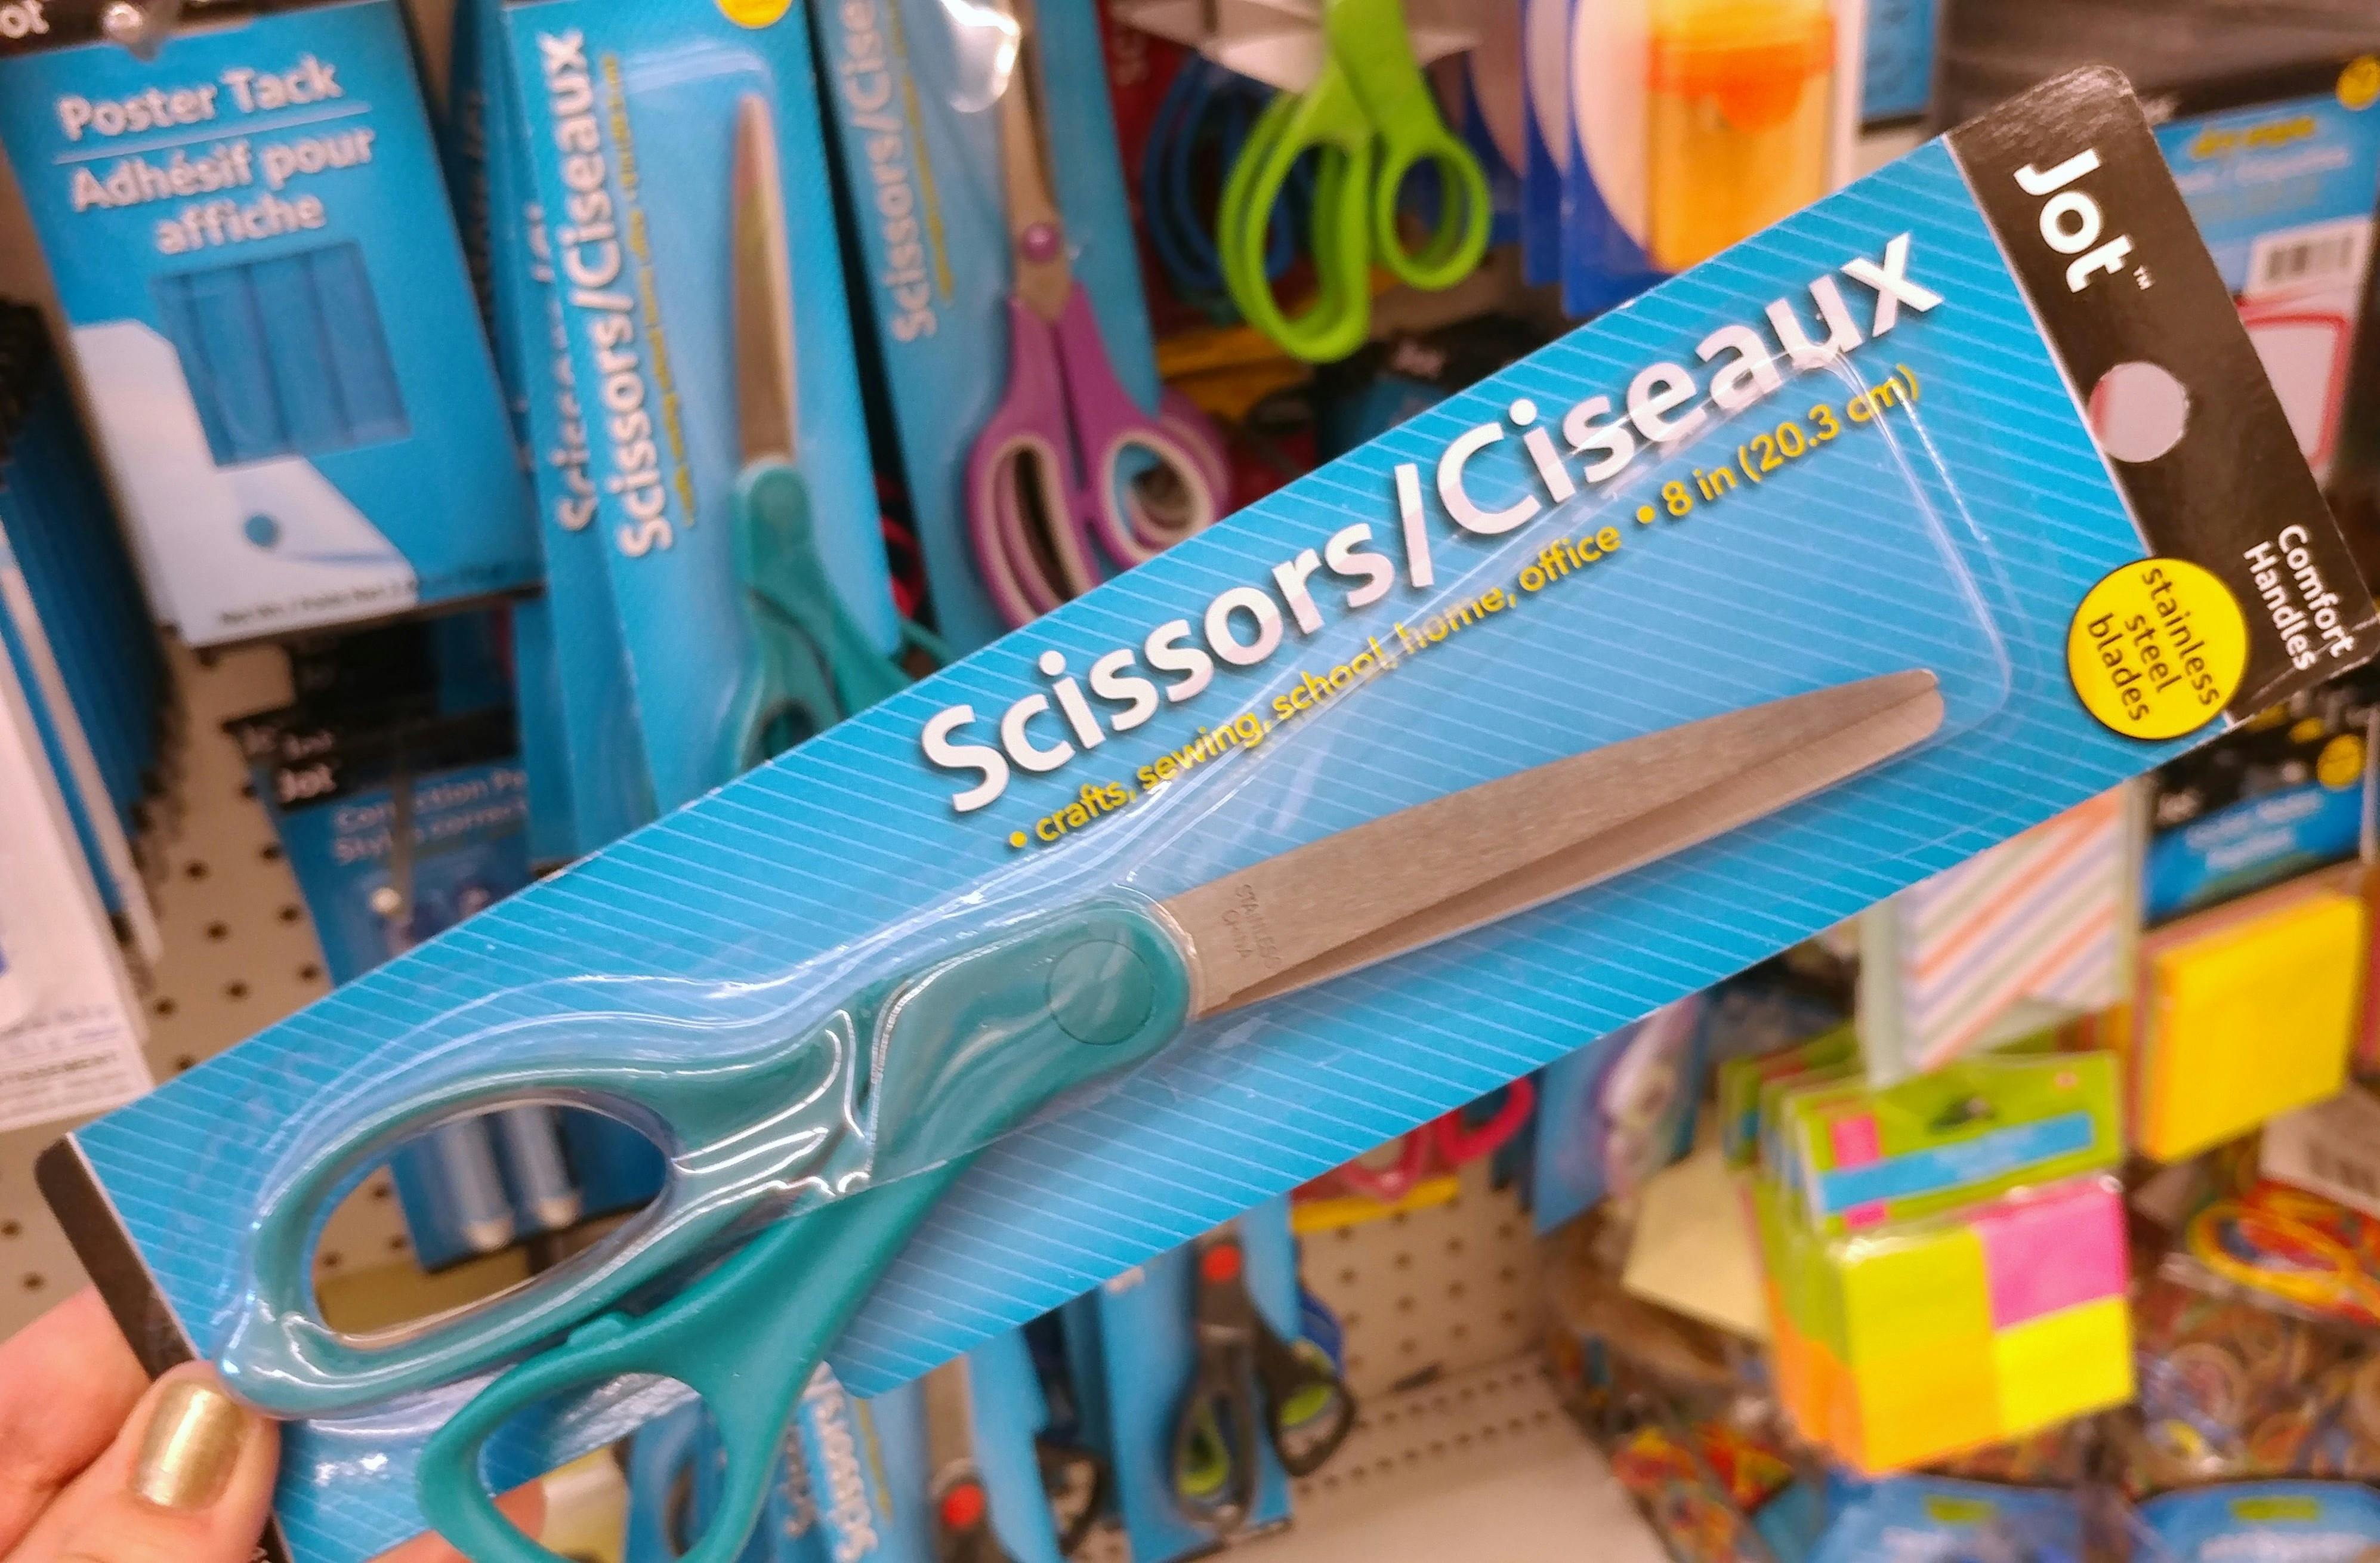 A person's hand holding up a pair of scissors in front of the display of scissors for sale at Dollar Tree.